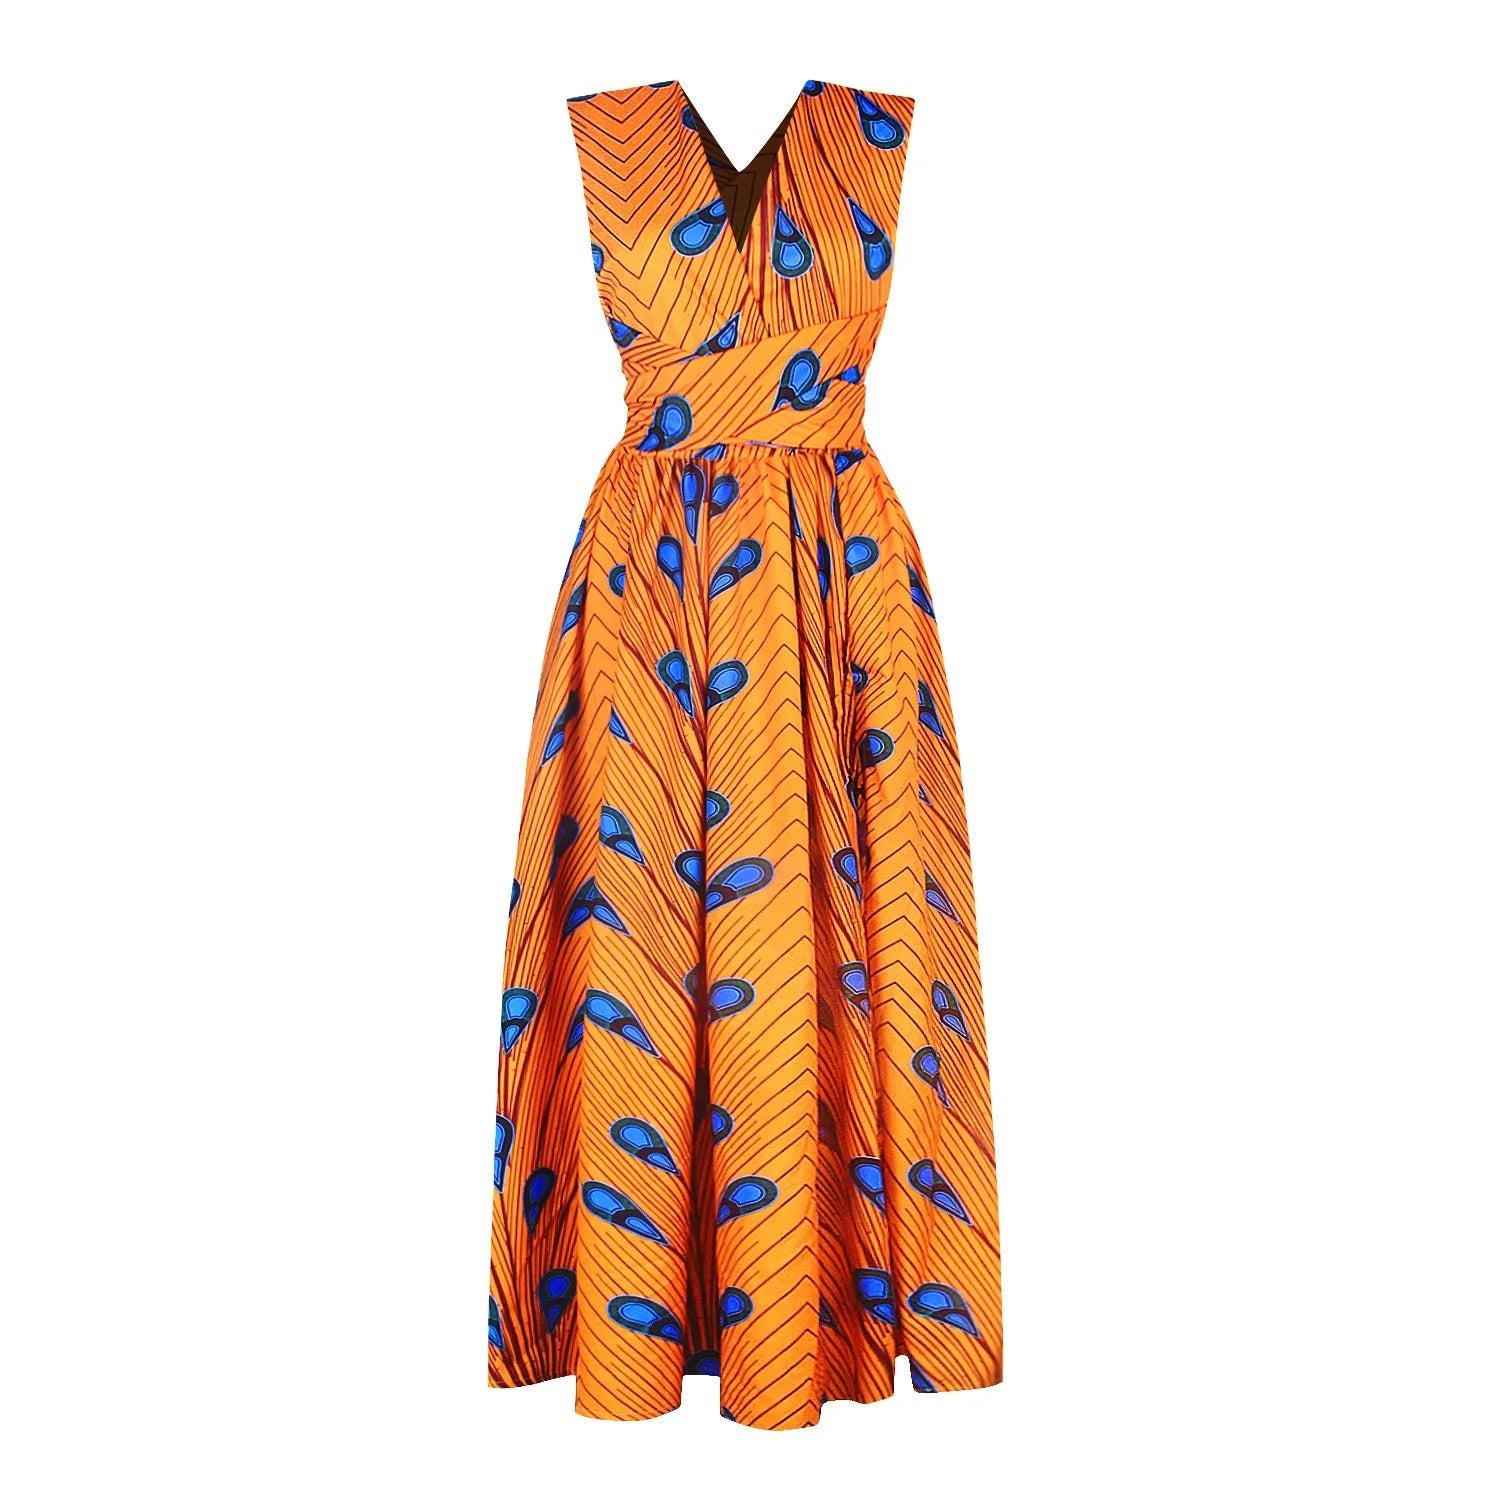 African-inspired Summer Dresses: Women's Fashion Vintage Print Jumpsuit Long Skirt Party Attire - Flexi Africa - Flexi Africa offers Free Delivery Worldwide - Vibrant African traditional clothing showcasing bold prints and intricate designs